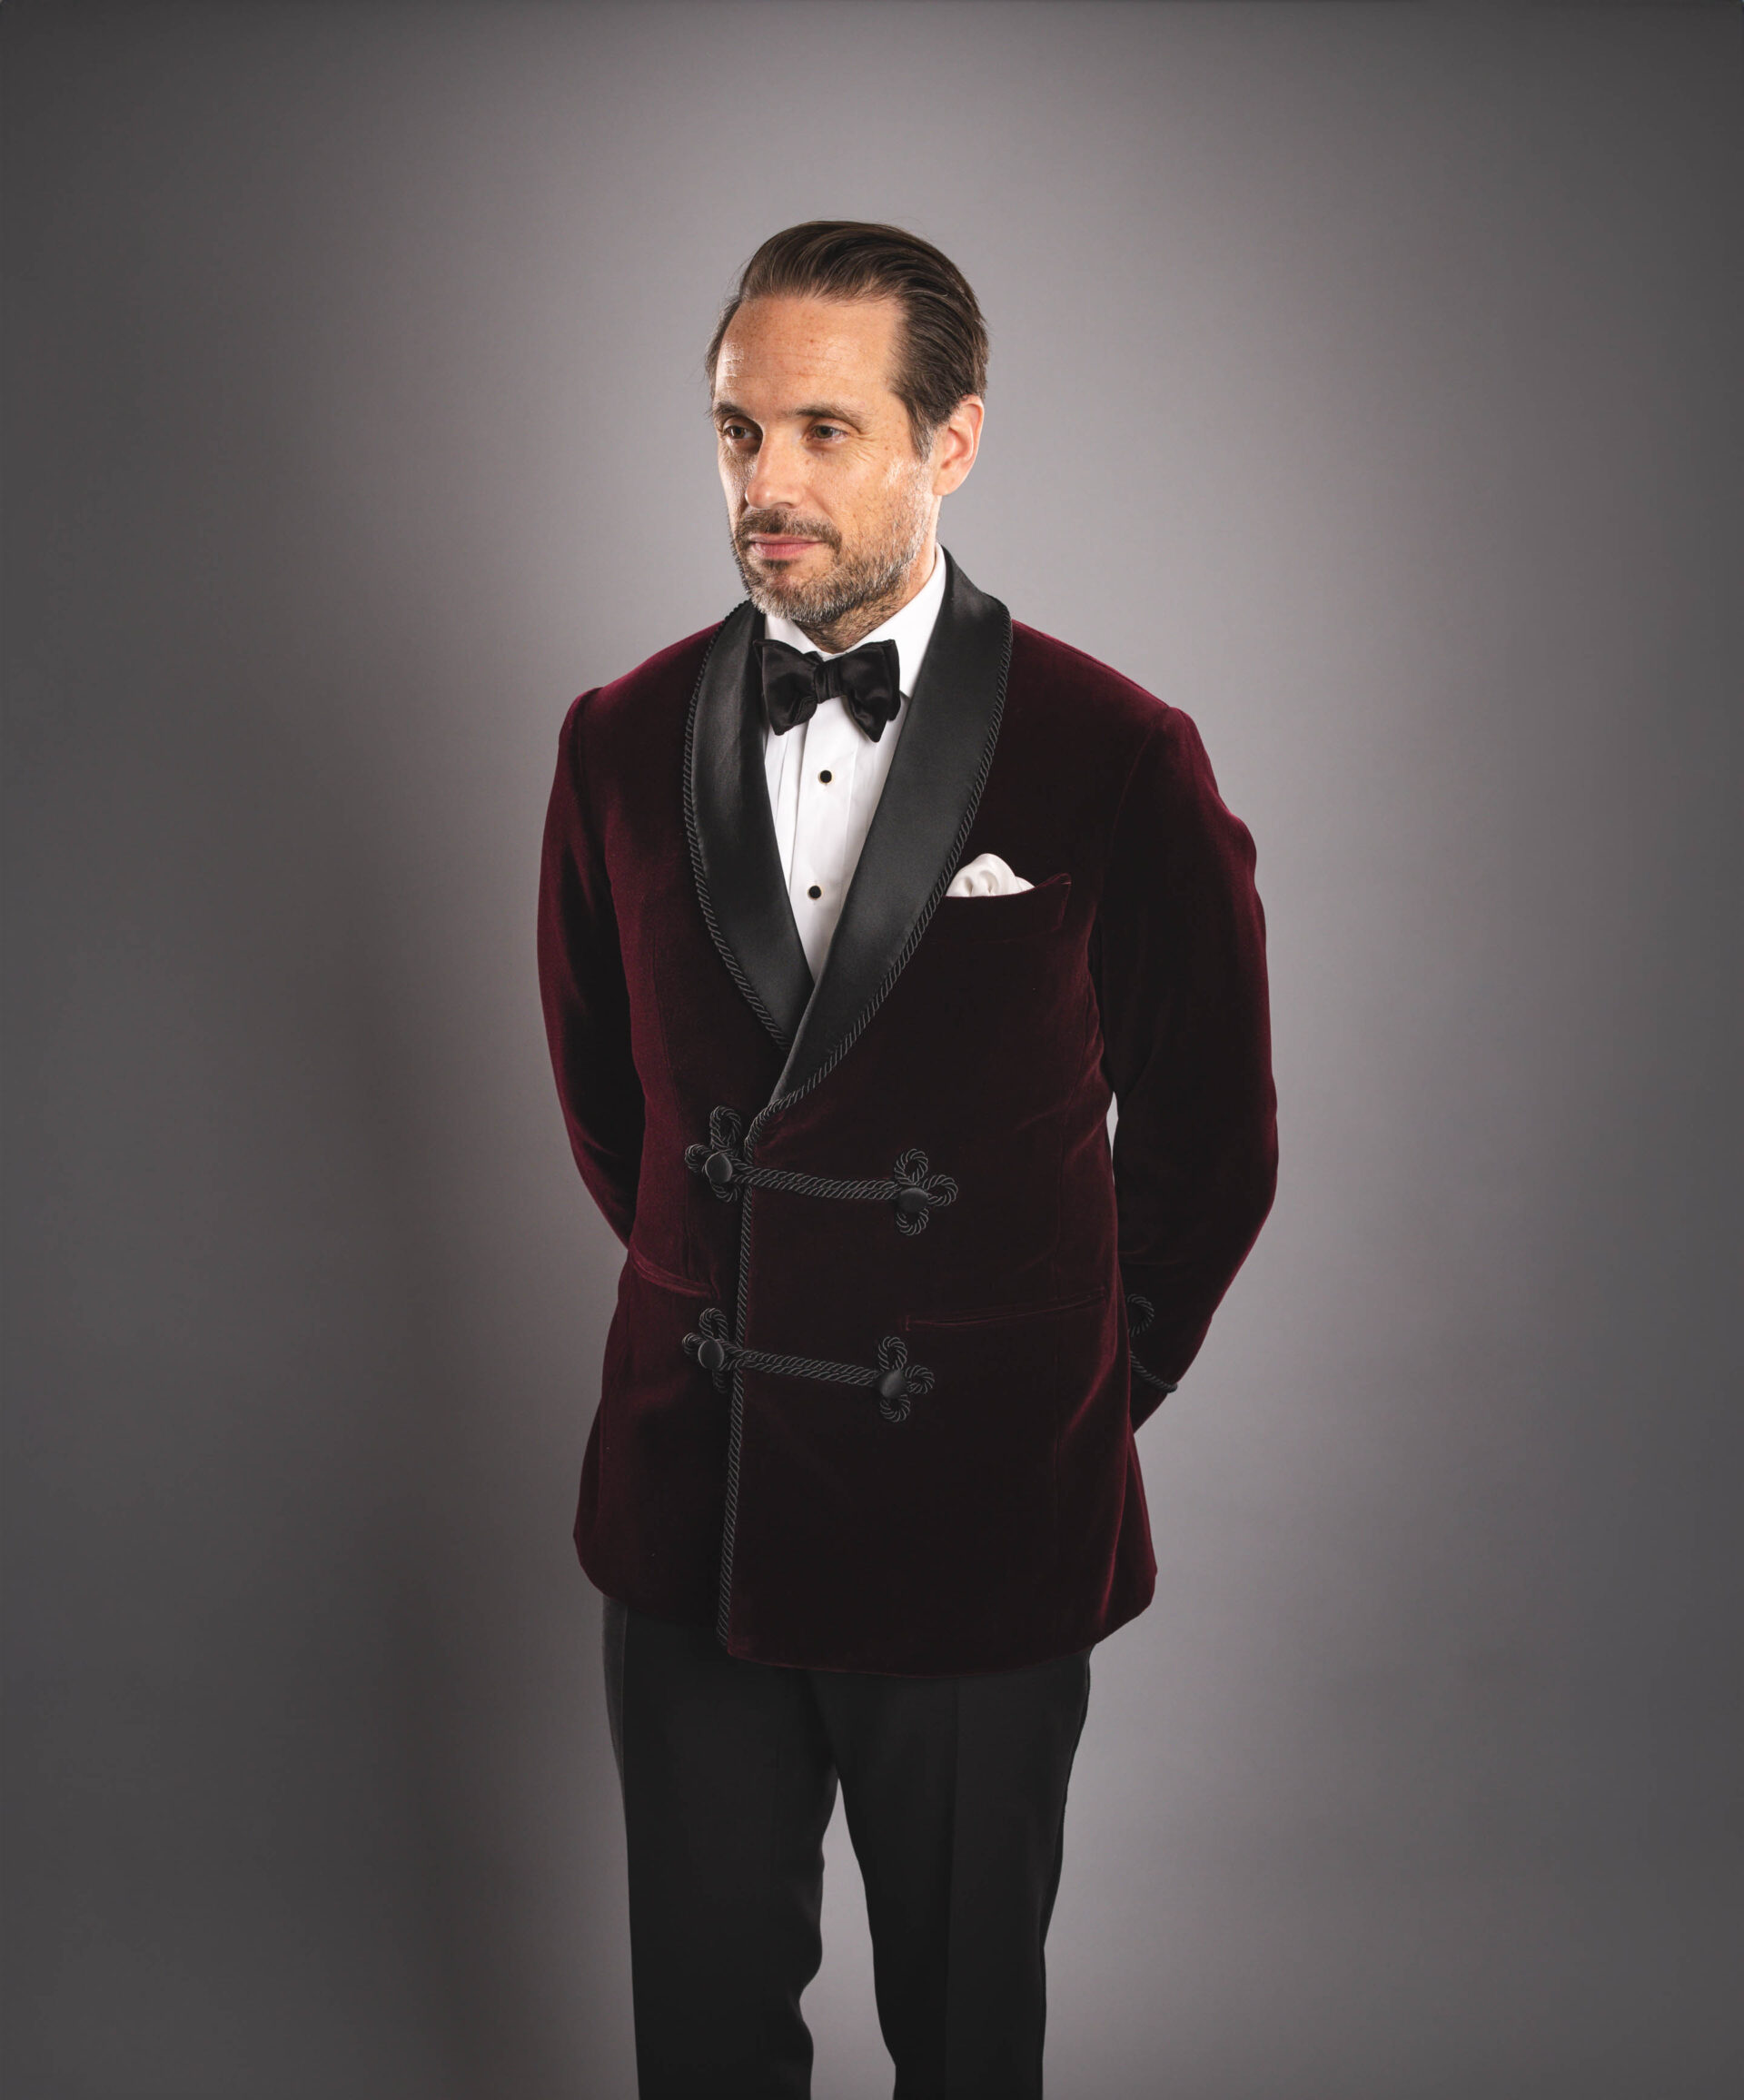 The Smoking Jacket: A Look At Classic Men's Smoking Jackets Including  History, Where To Buy & How To Wear 